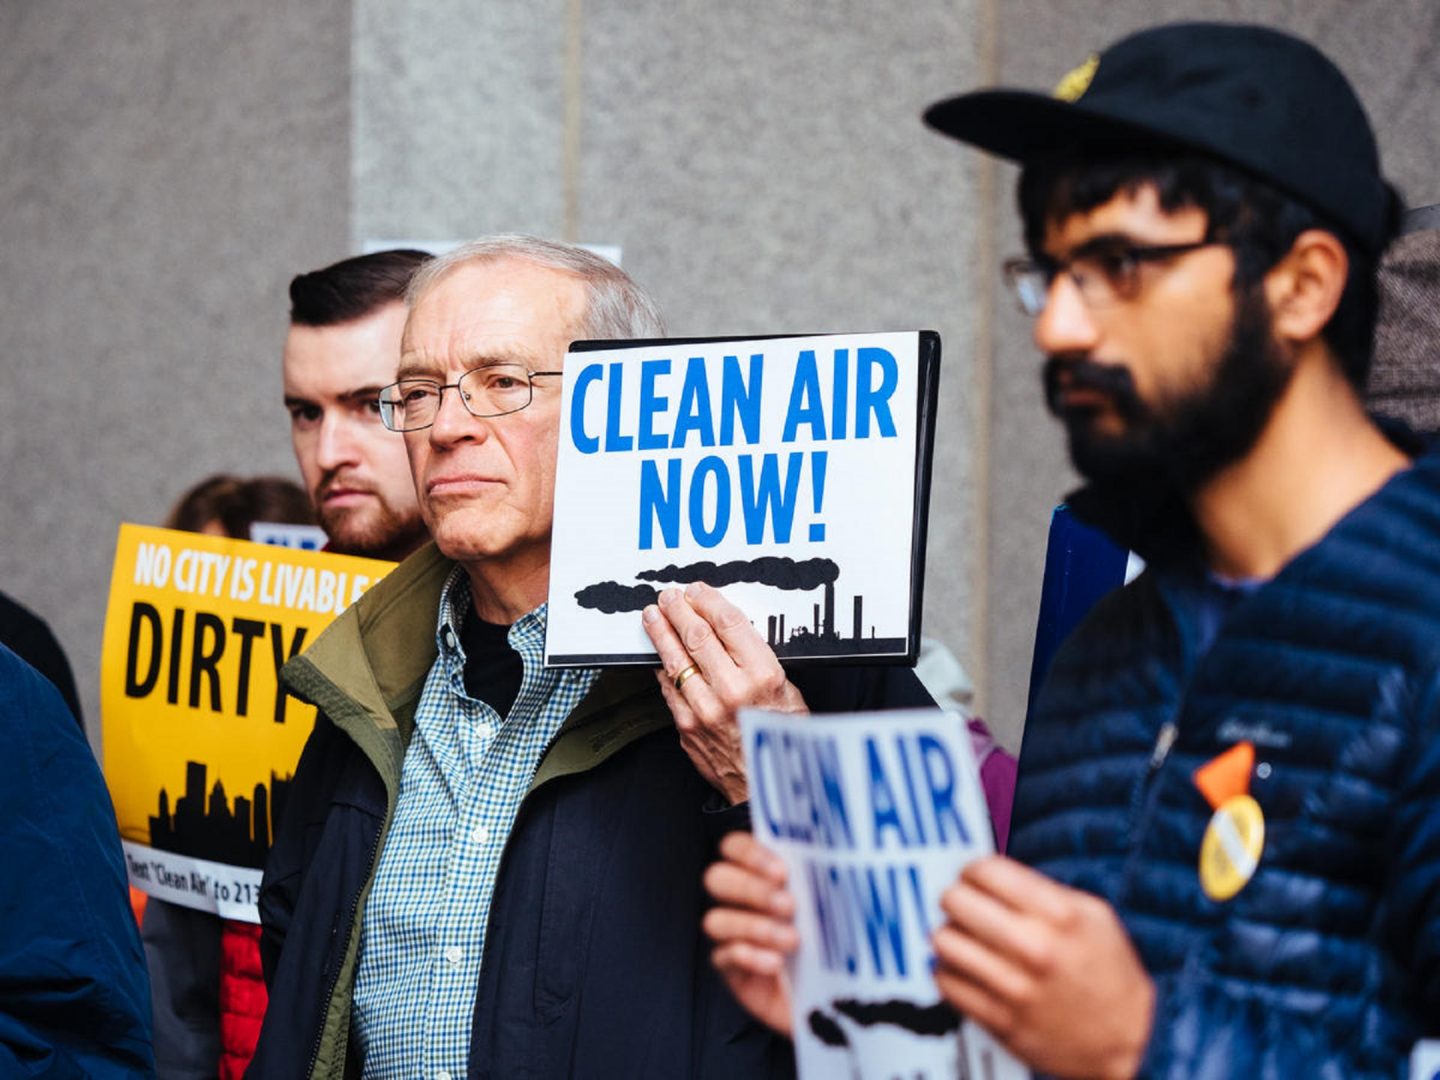 Protestors gathered at the City-County building in downtown Pittsburgh for a clean air rally on January 10, 2020 in Pittsburgh, Pennsylvania.